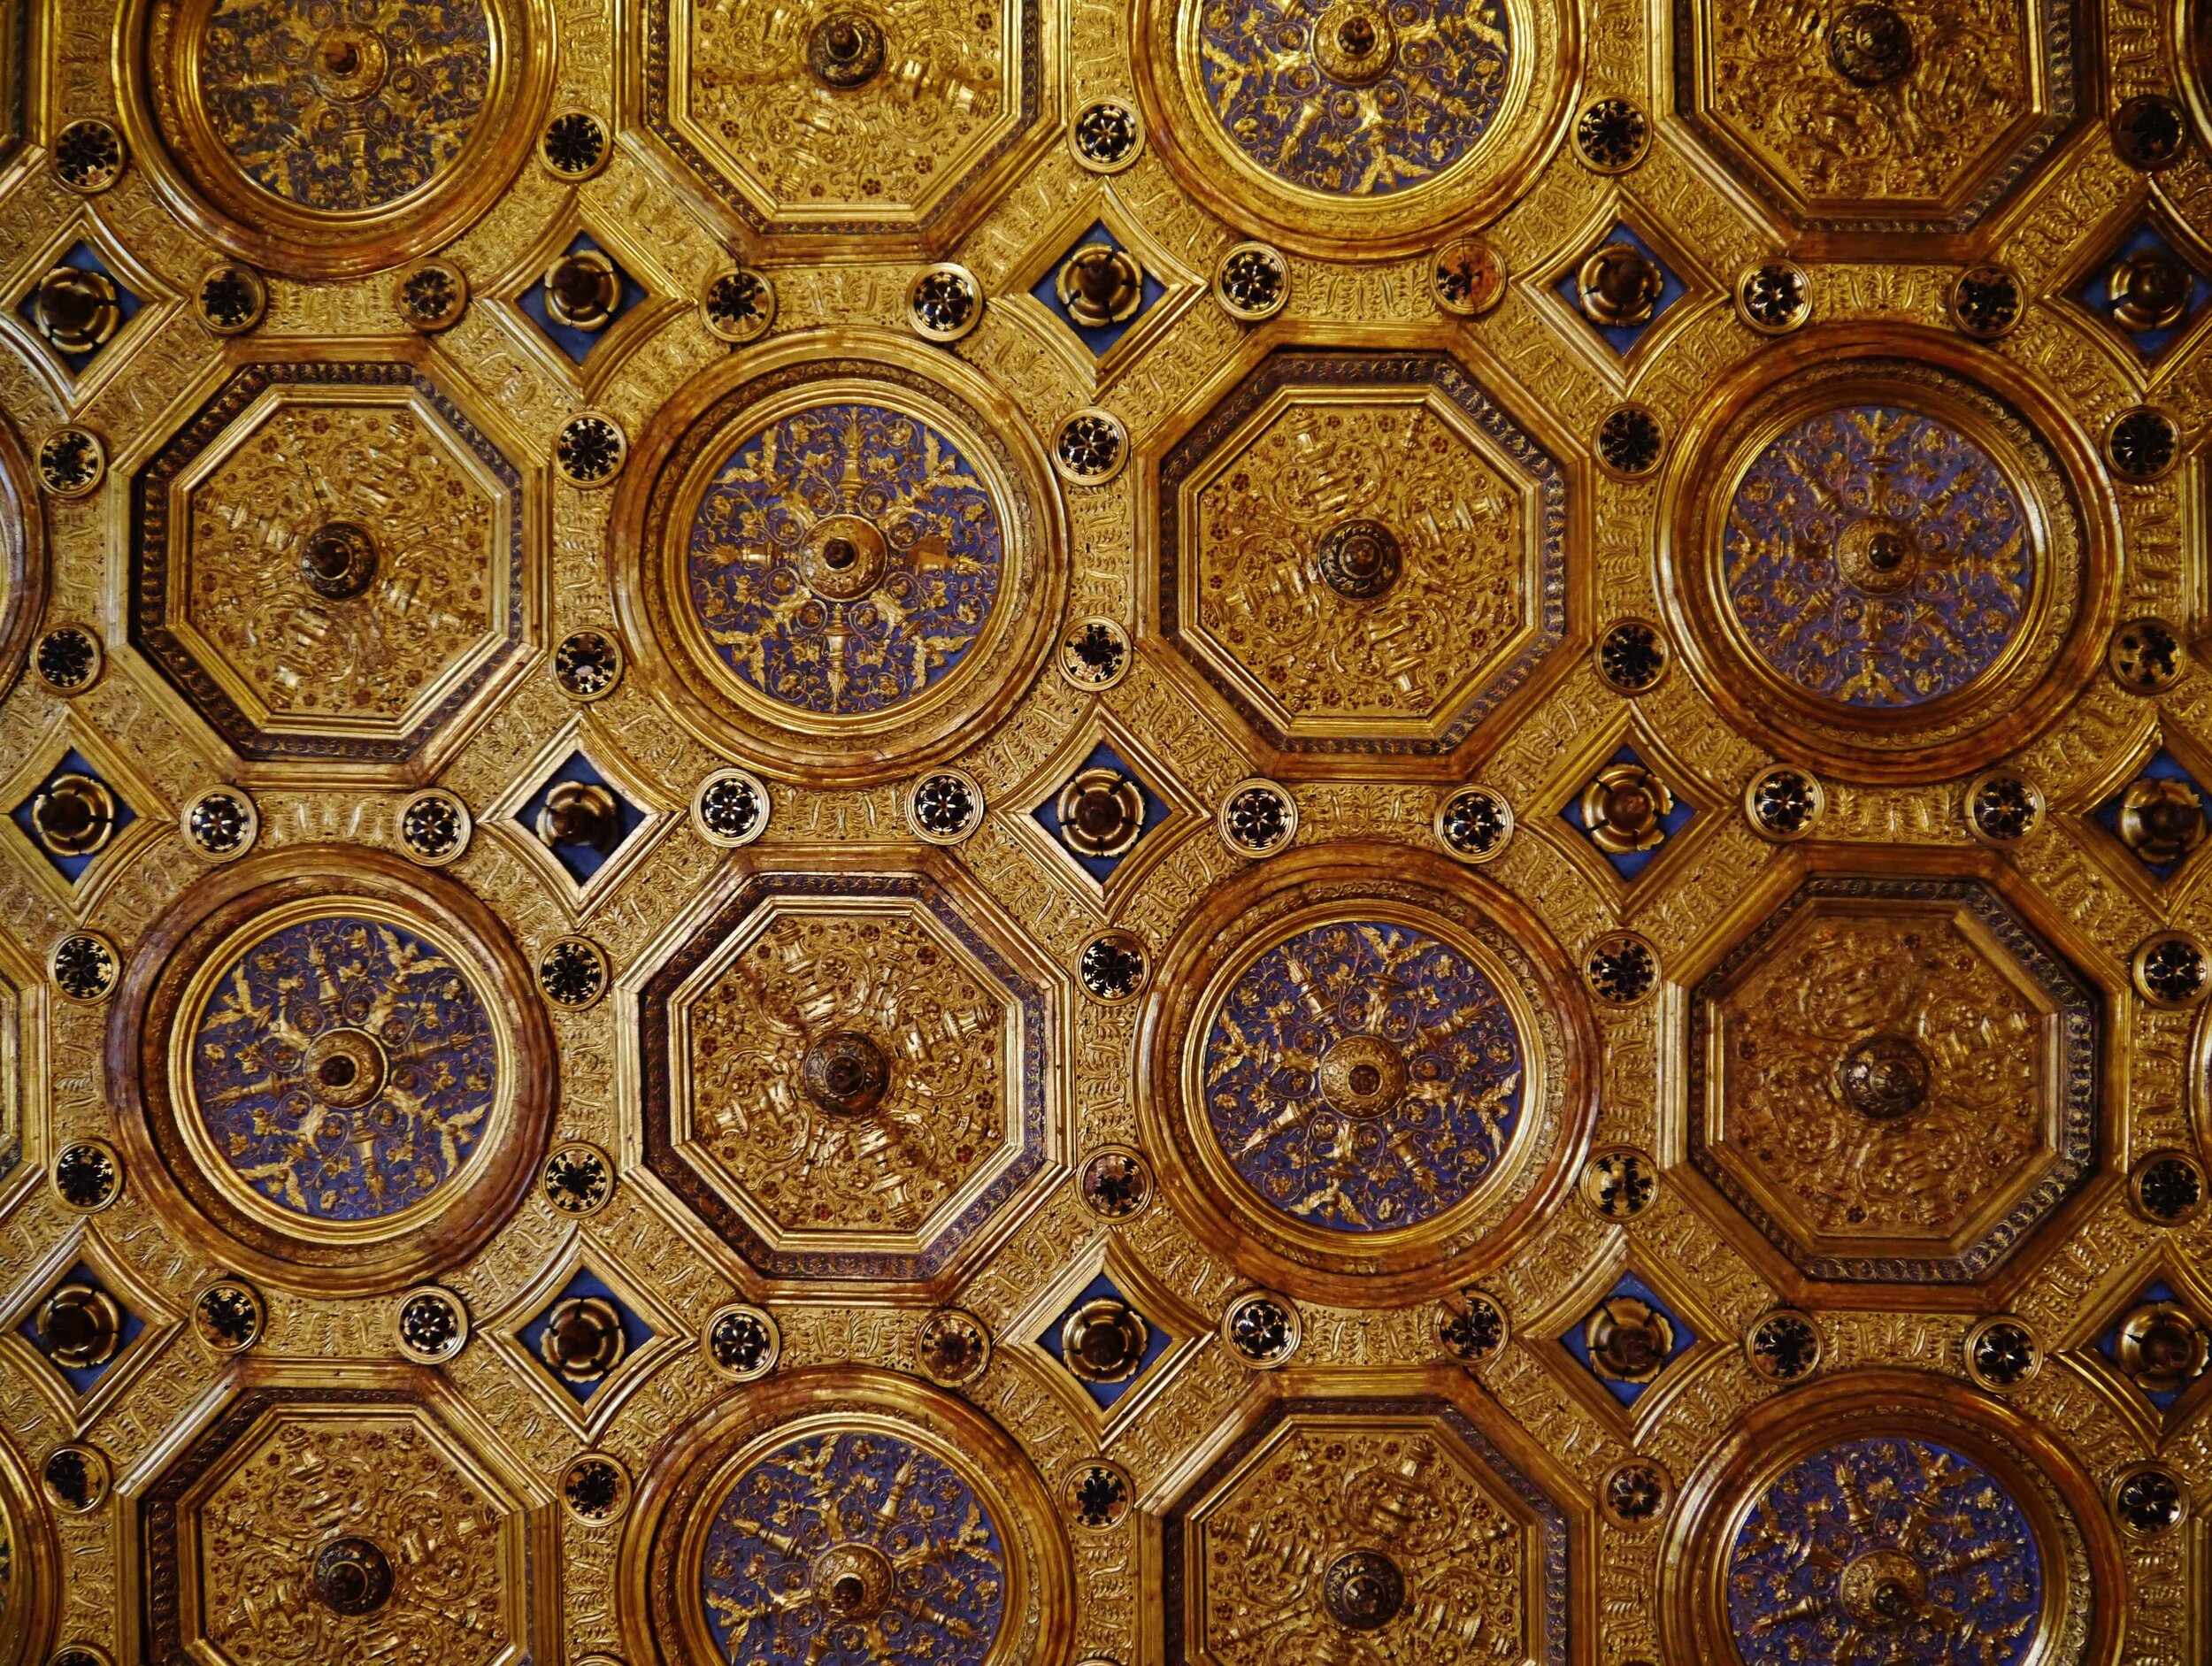 Fig. 10 Ceiling of Isabella’s studiolo in the Ducal Palace, Mantua. Image: Wikimedia commons/Zairon (CC-BY-SA 4.0) .